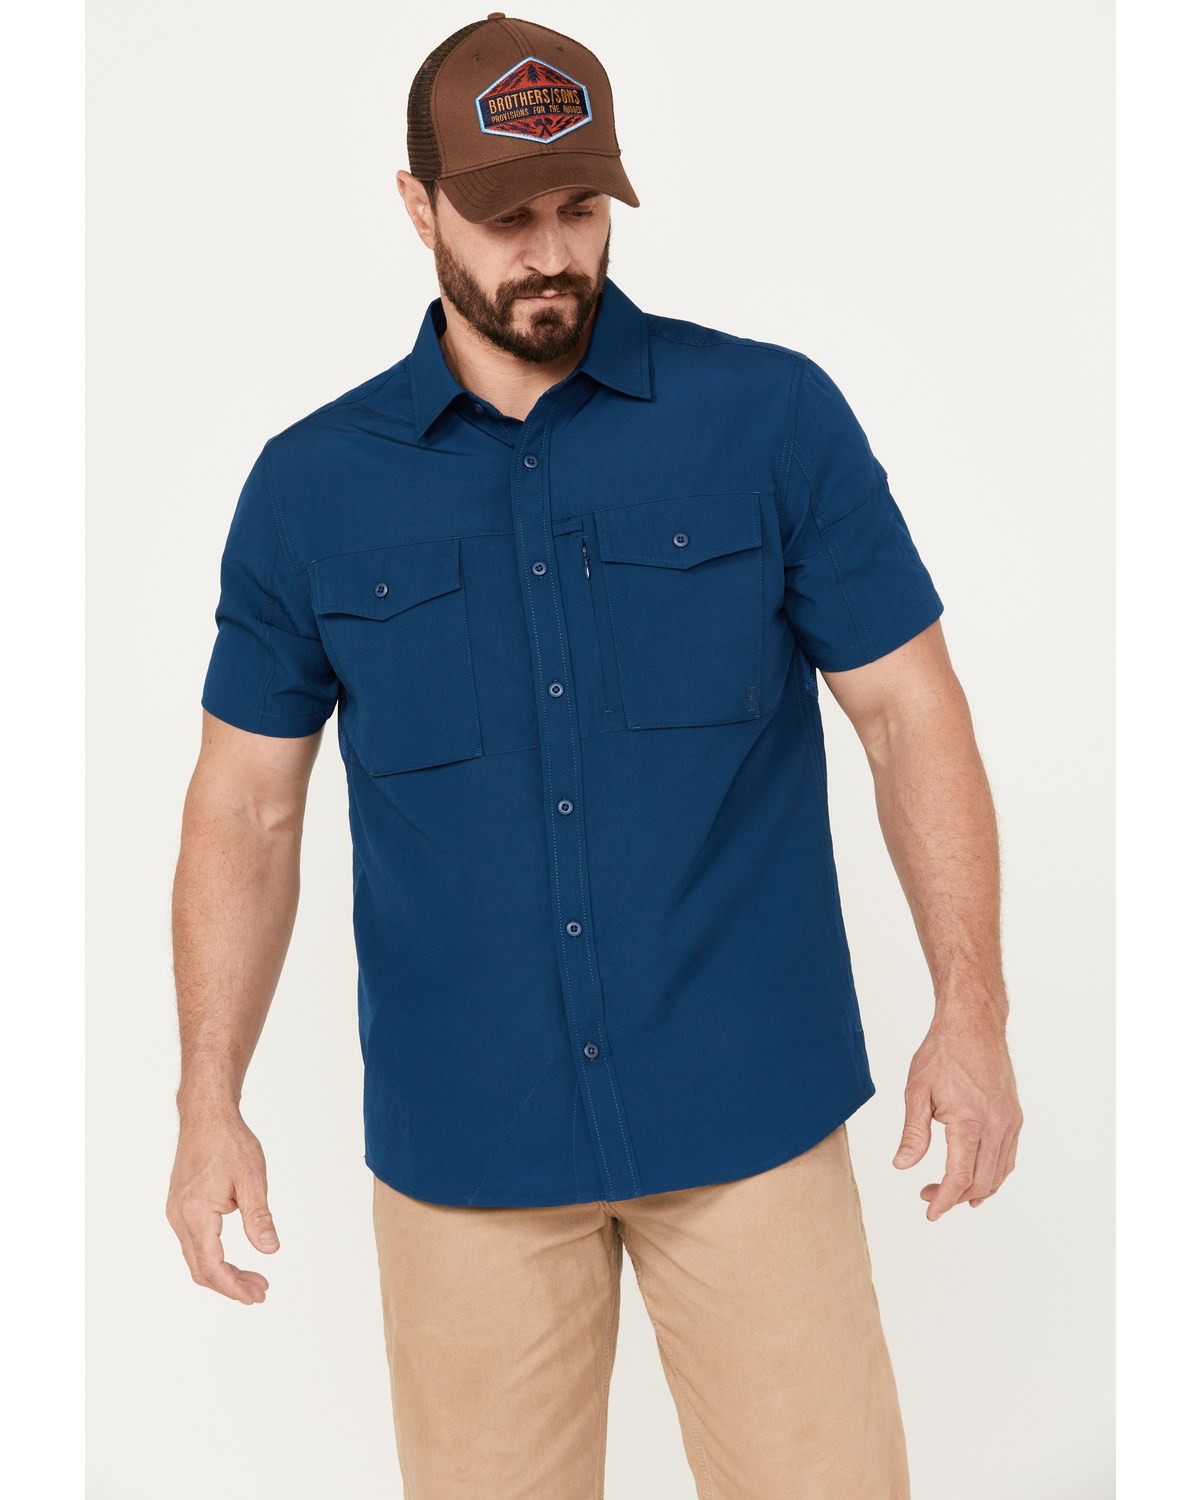 Brothers and Sons Men's Sun Short Sleeve Button-Down Western Shirt